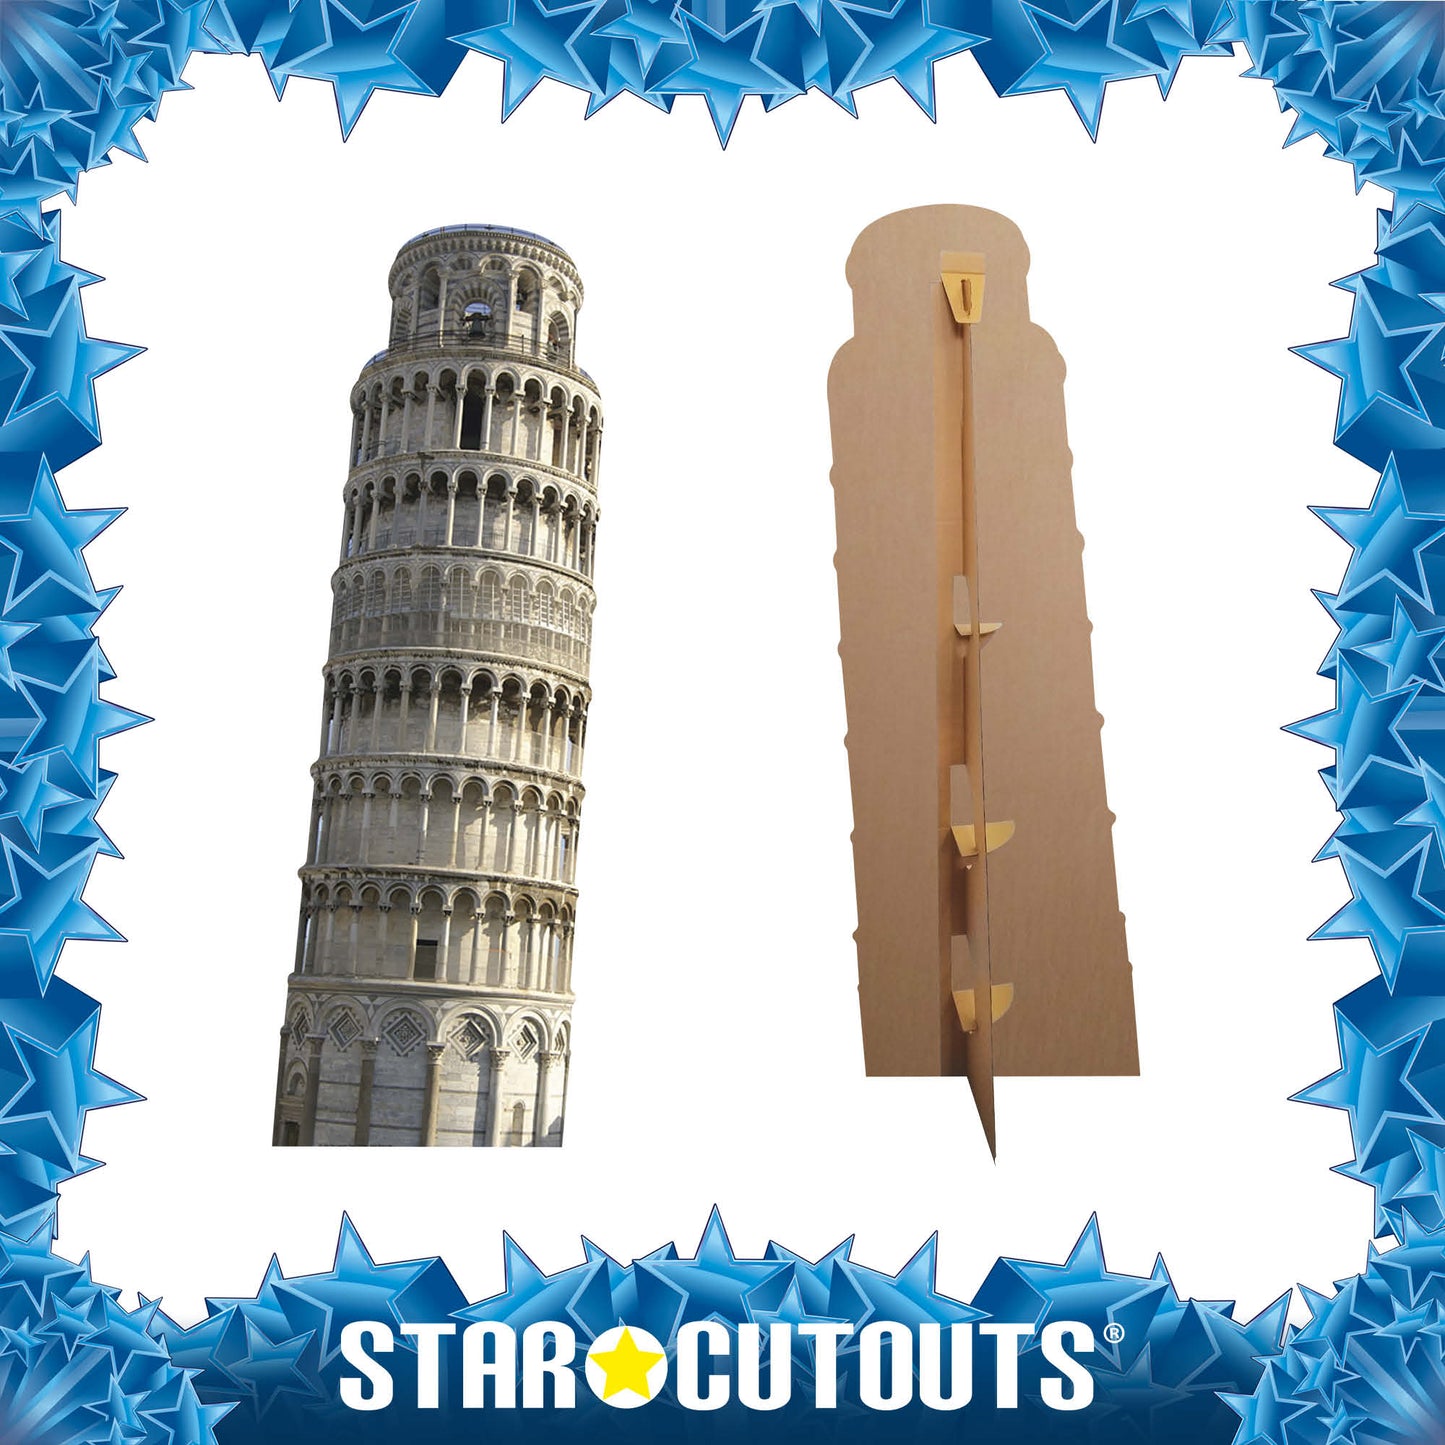 The Leaning Tower Of Pisa Cardboard Cutout